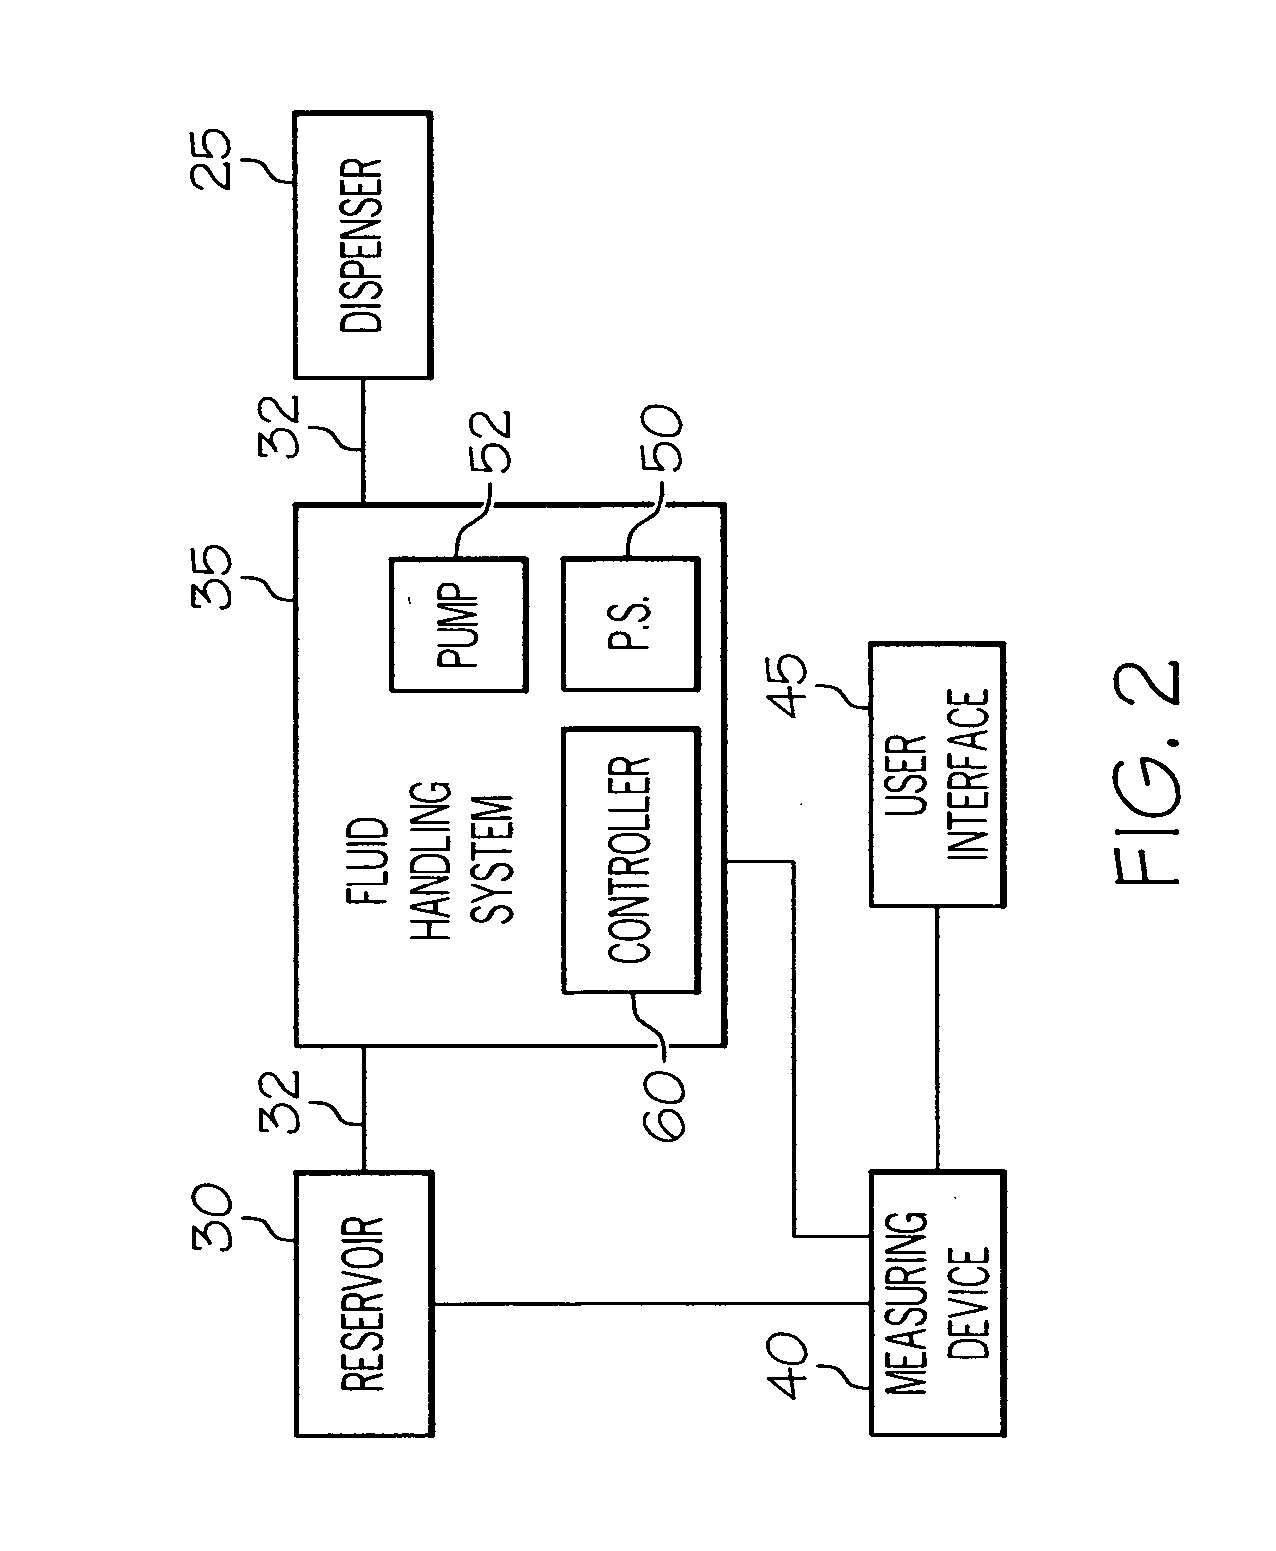 Fabric article treating device and system with user interface